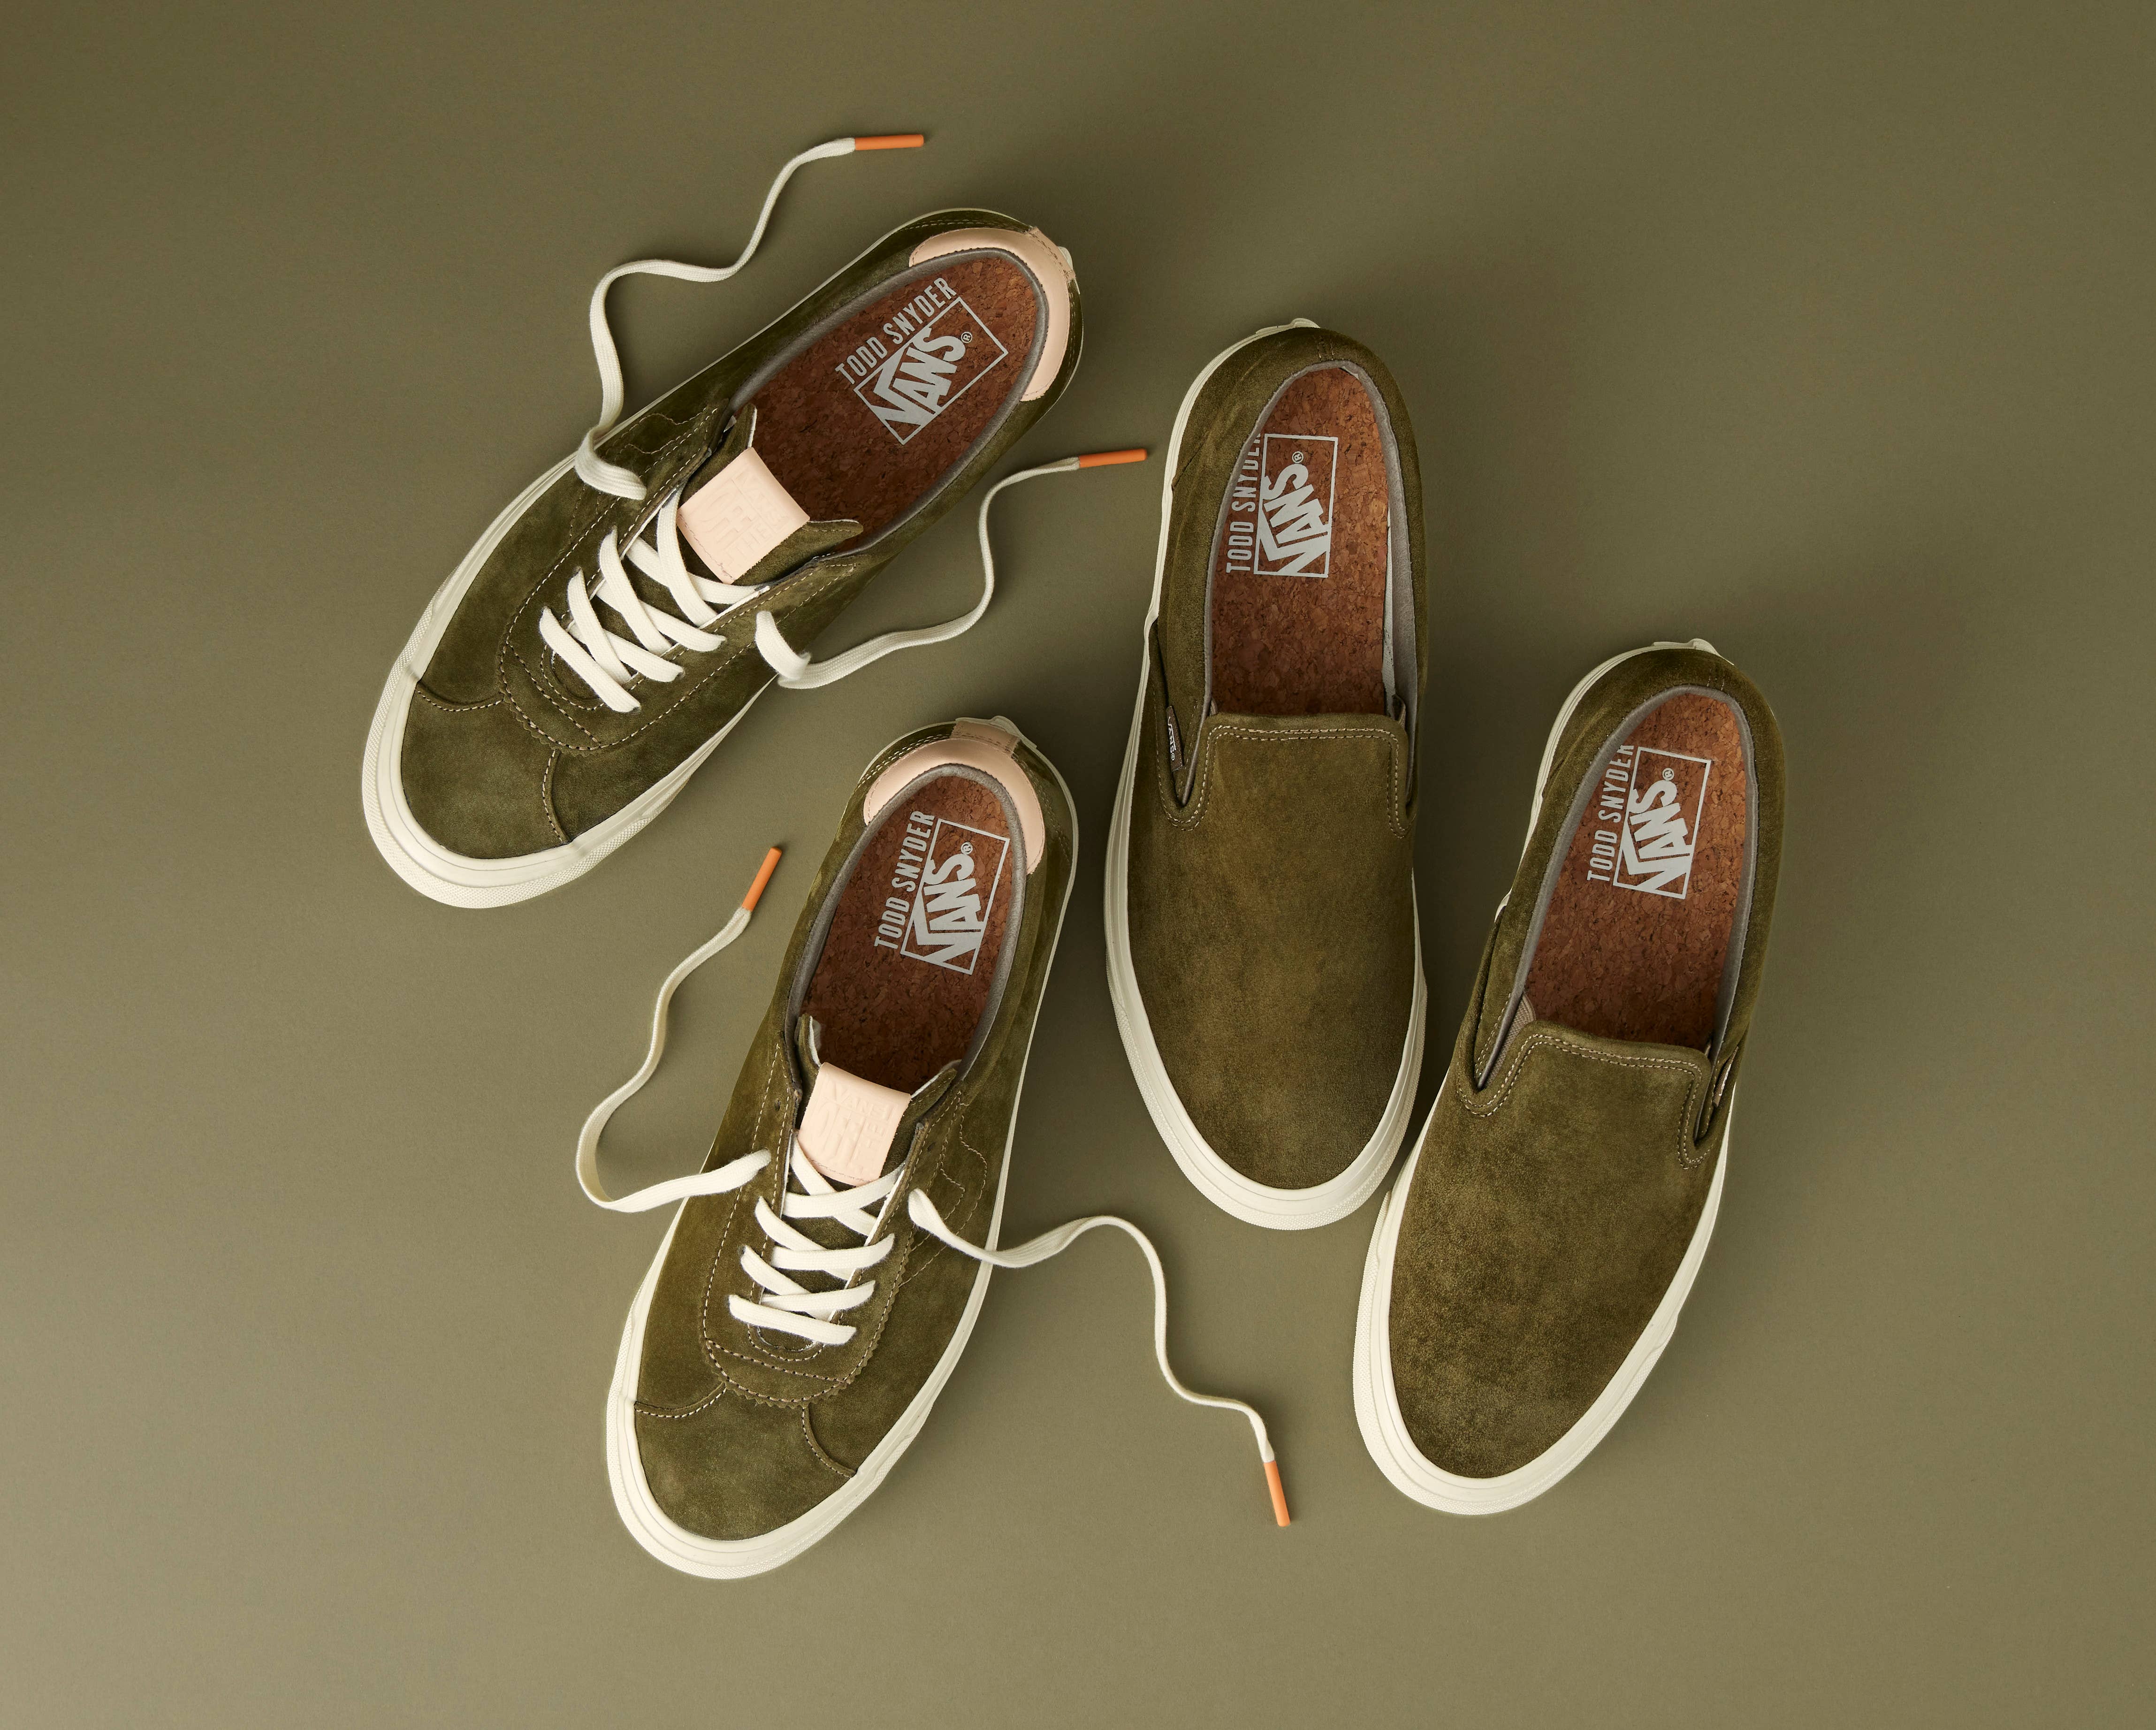 Californian Shoe Collections : Vans' new collection